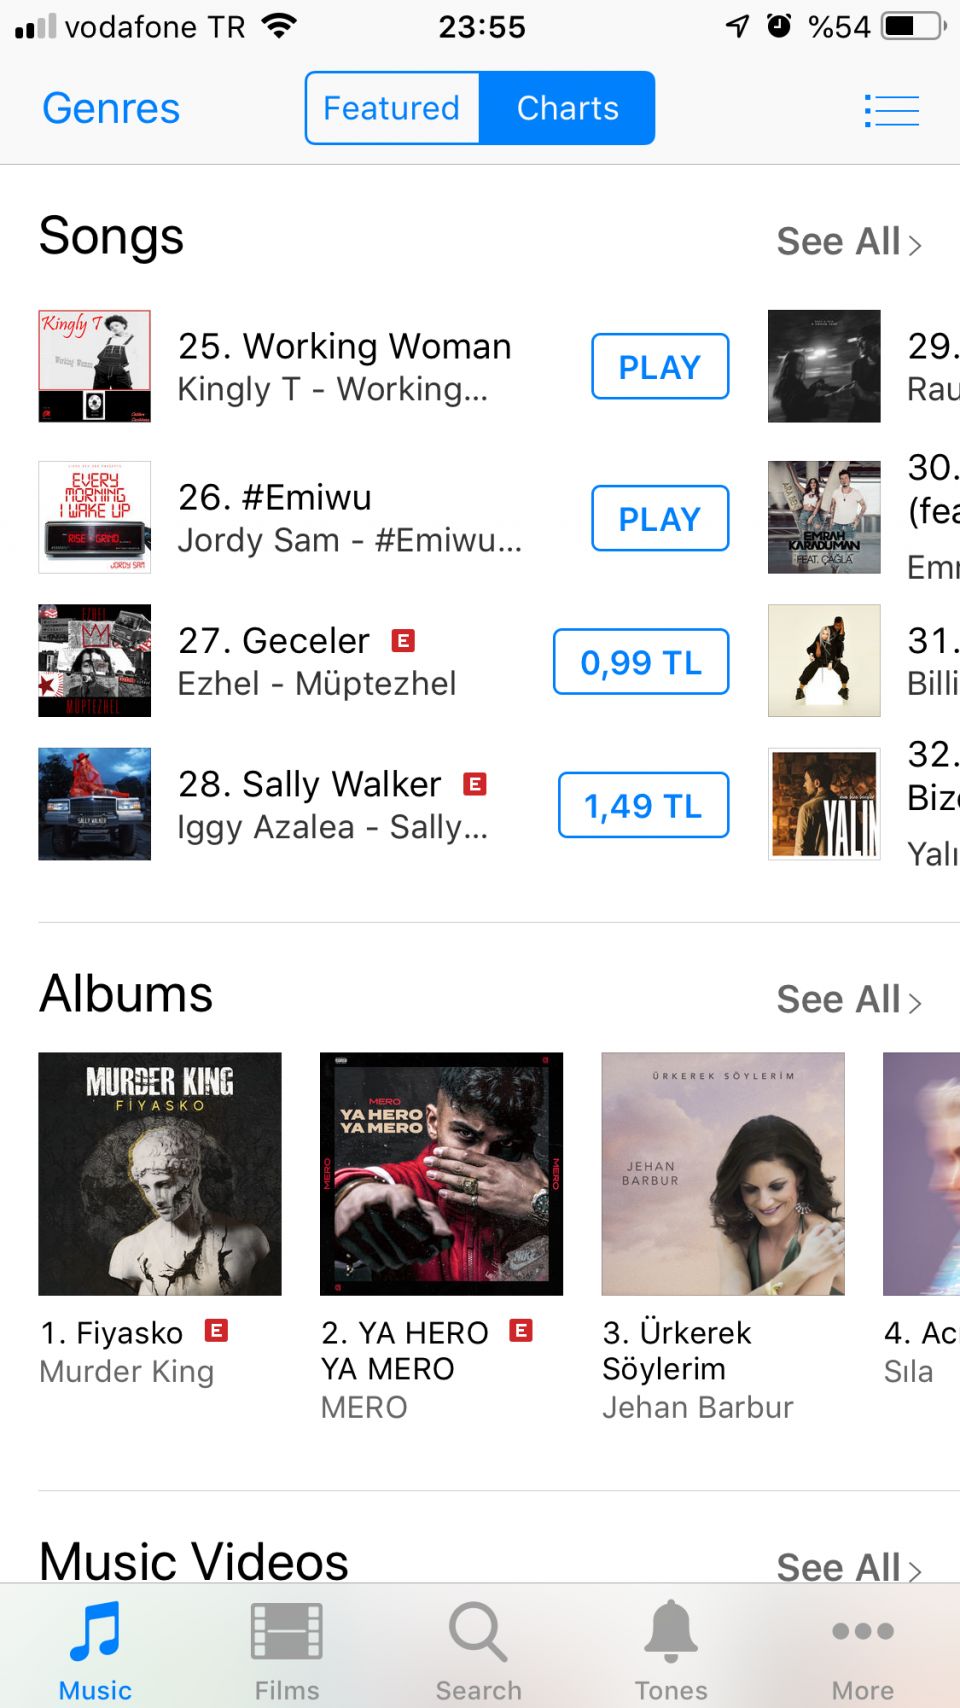 Working Women by Kingly T made it to top of the Itunes charts